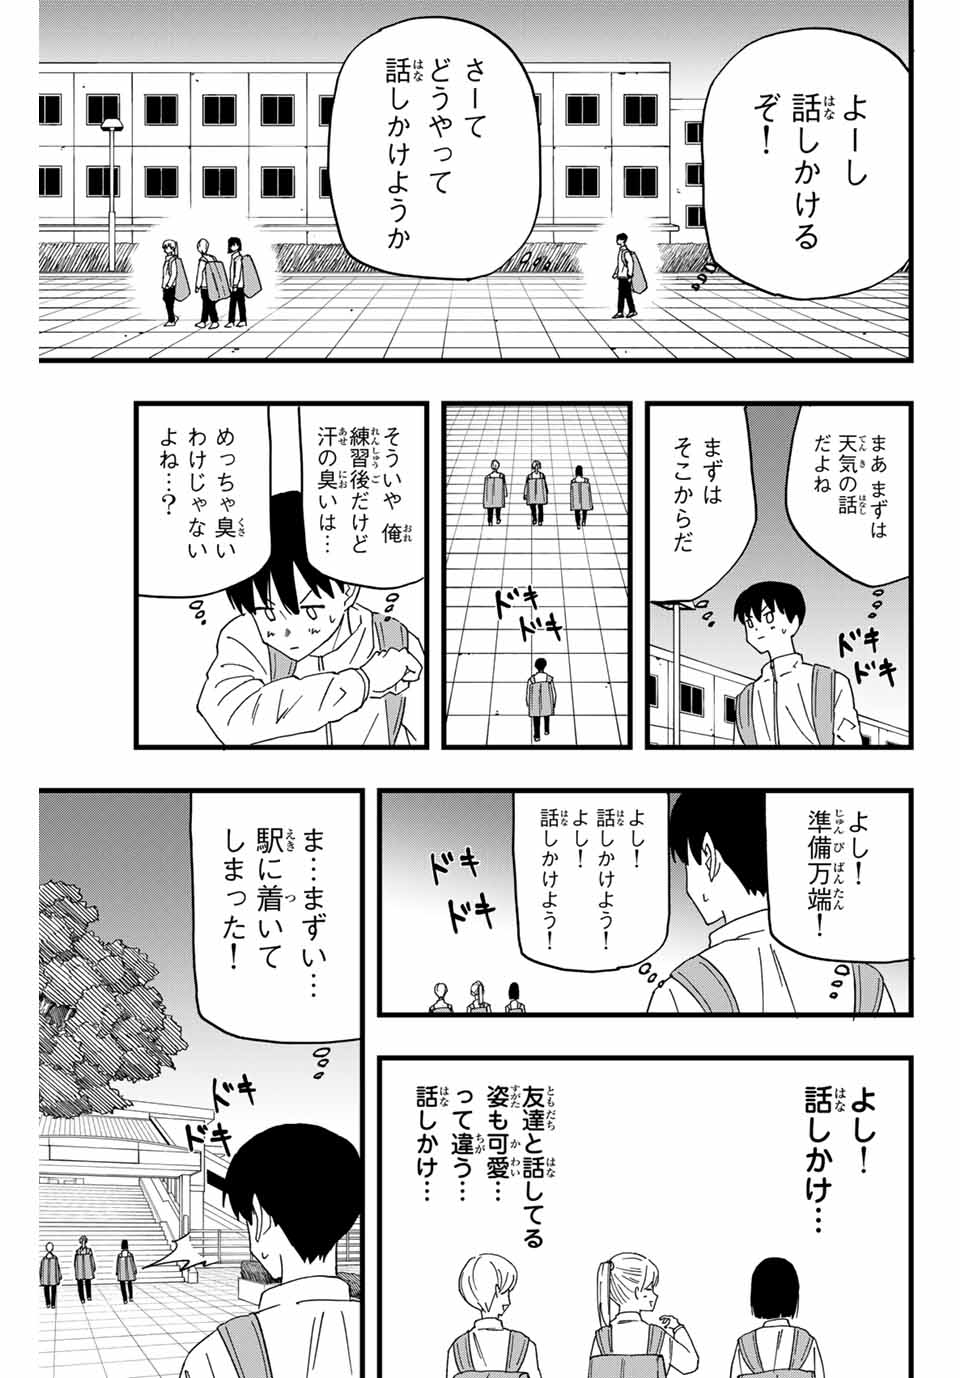 LoVE GAME 第2話 - Page 19